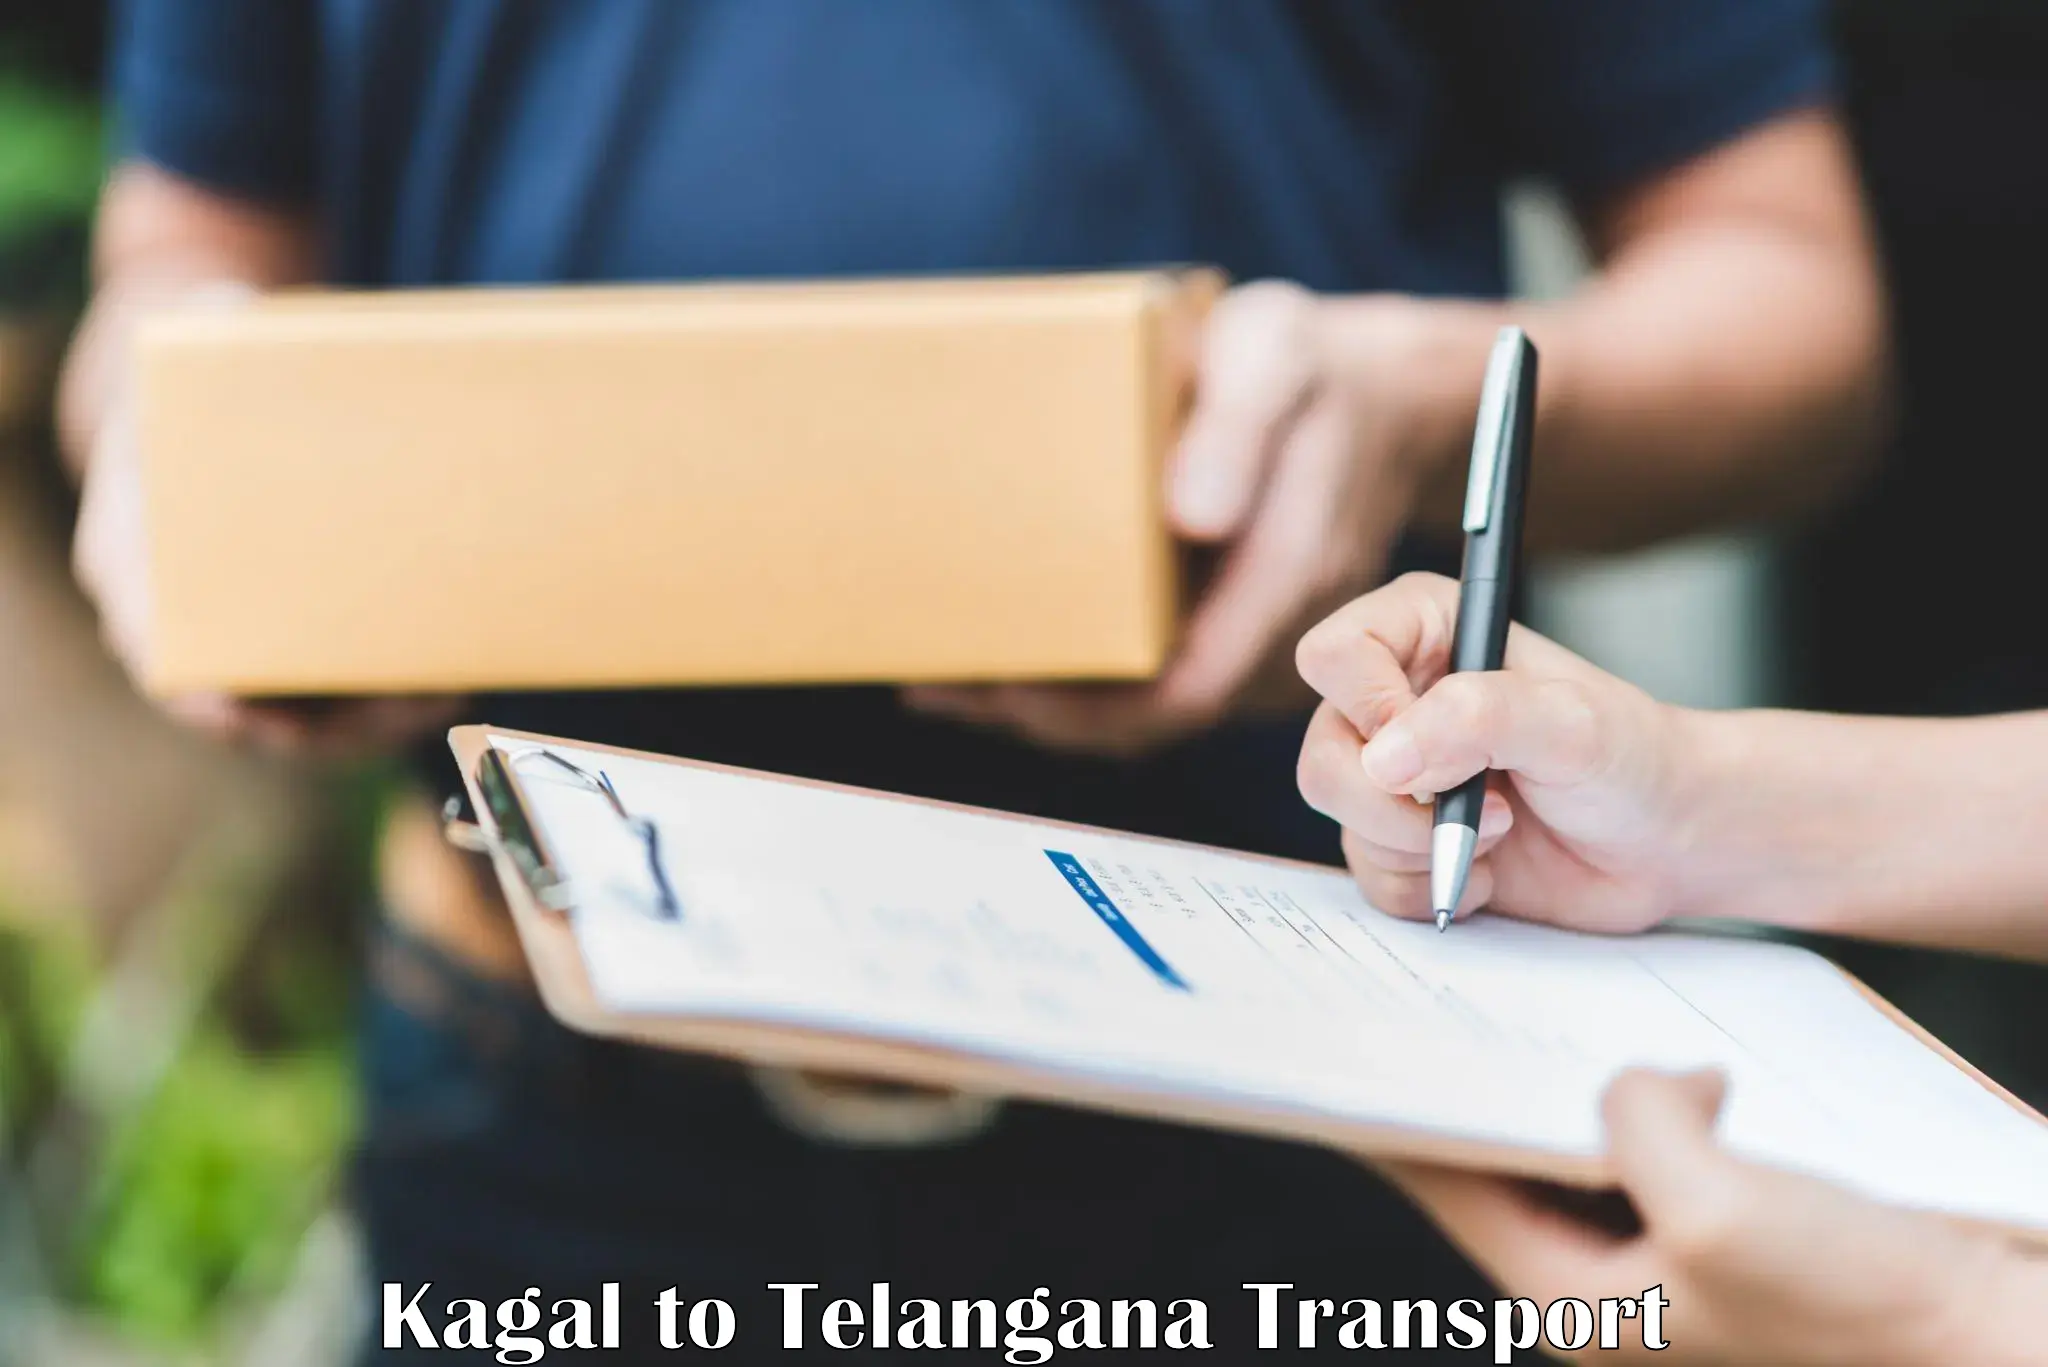 Nearest transport service in Kagal to Husnabad